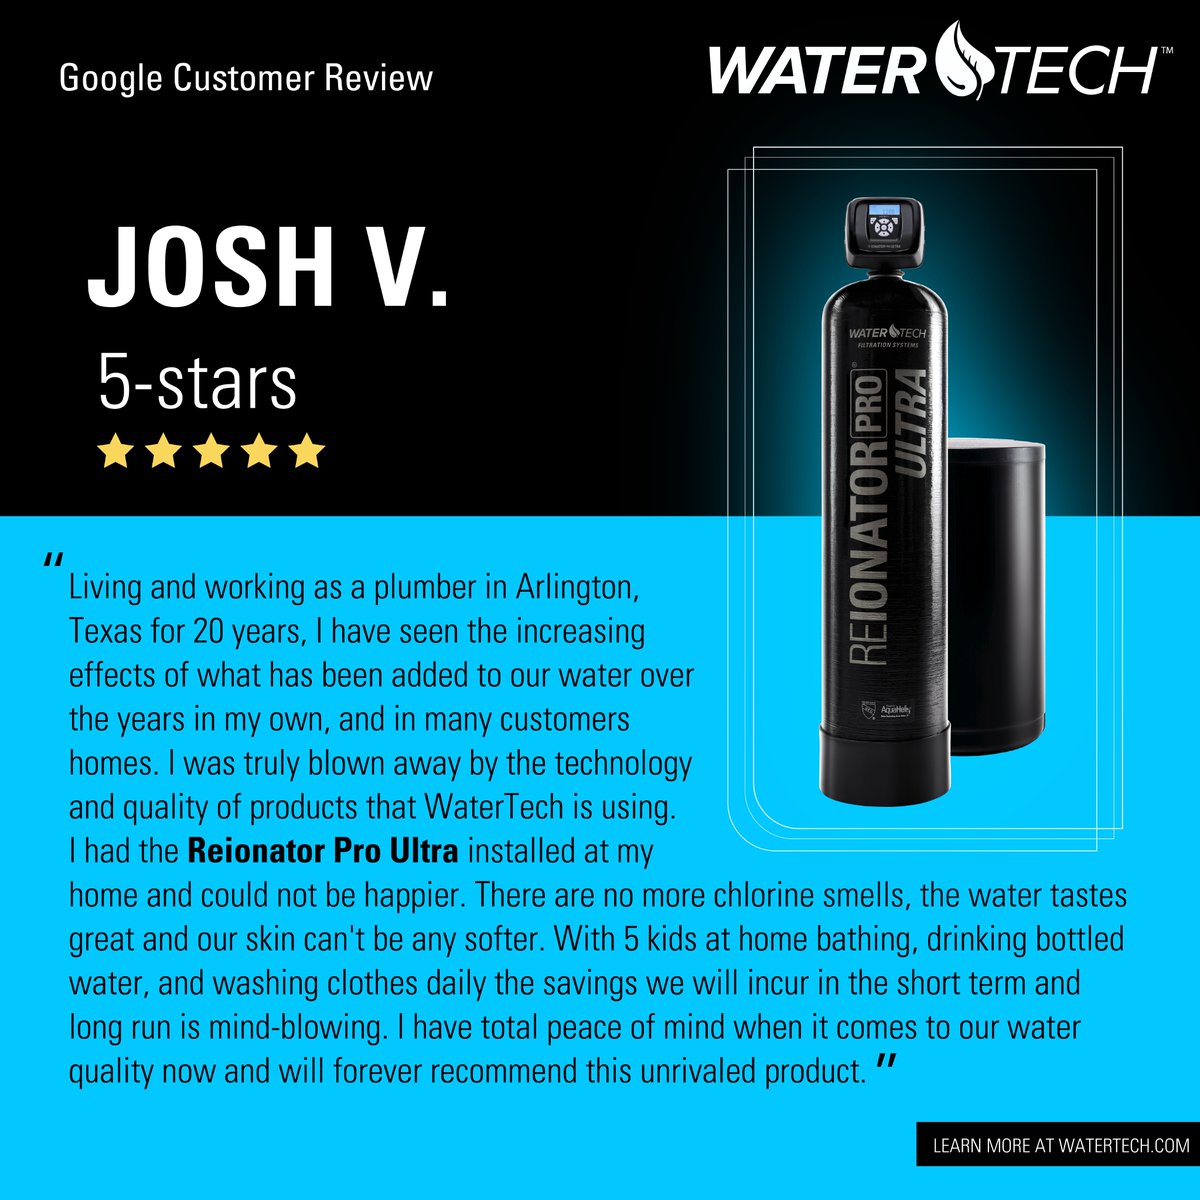 A big thank you for the 5-star review, Josh! We are thrilled that you've had a great experience with the Reionator Pro Ultra. Your feedback means a lot and inspires us to keep delivering our best. Thanks for being an awesome part of our WaterTech community!
#thankyou #fivestars